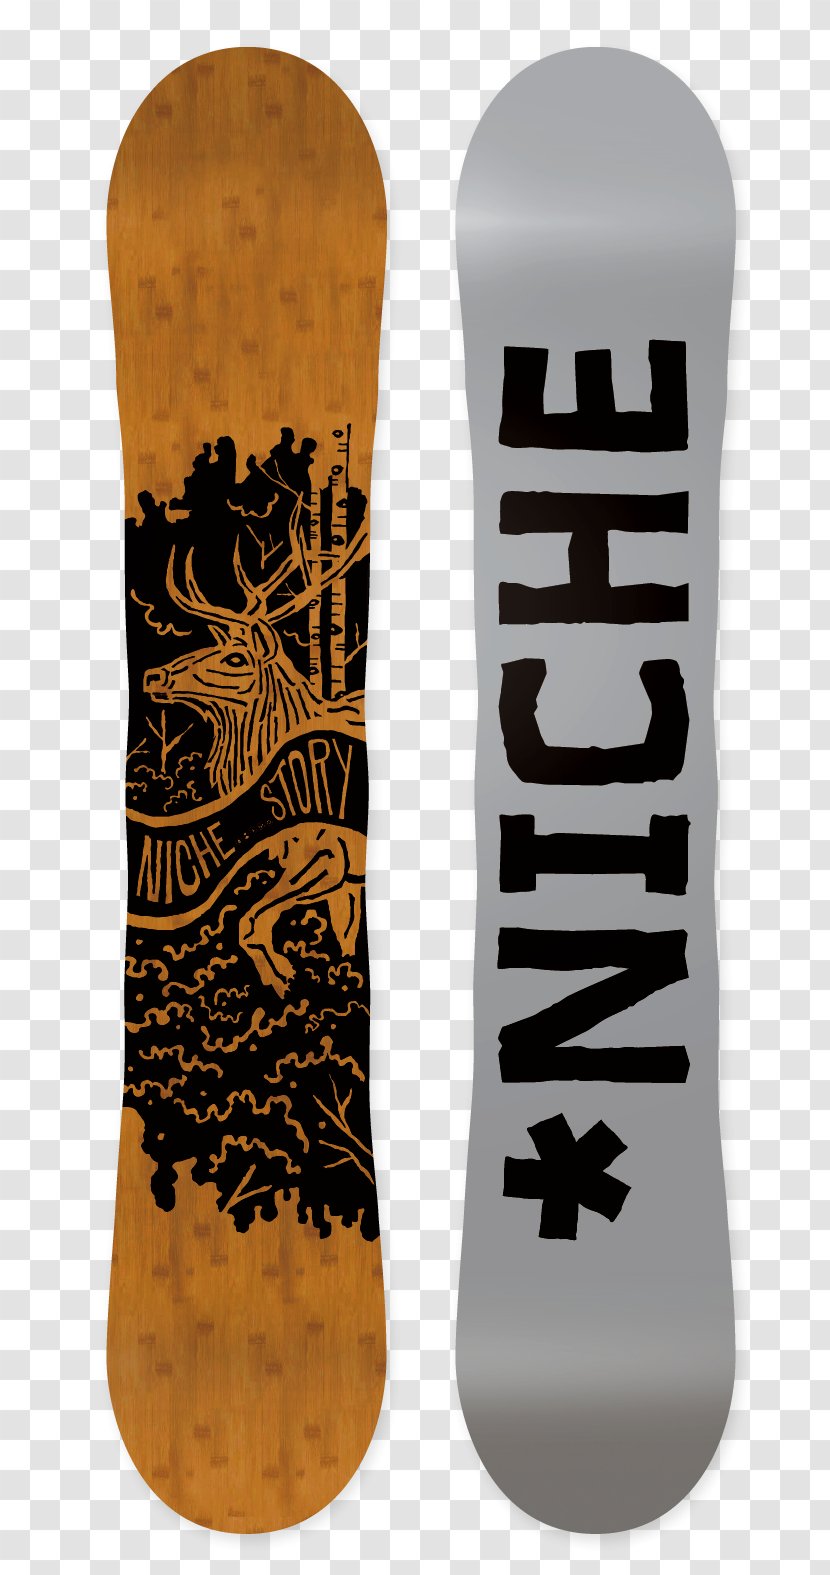 Snowboard Graphic Design Printing - Sports Equipment Transparent PNG